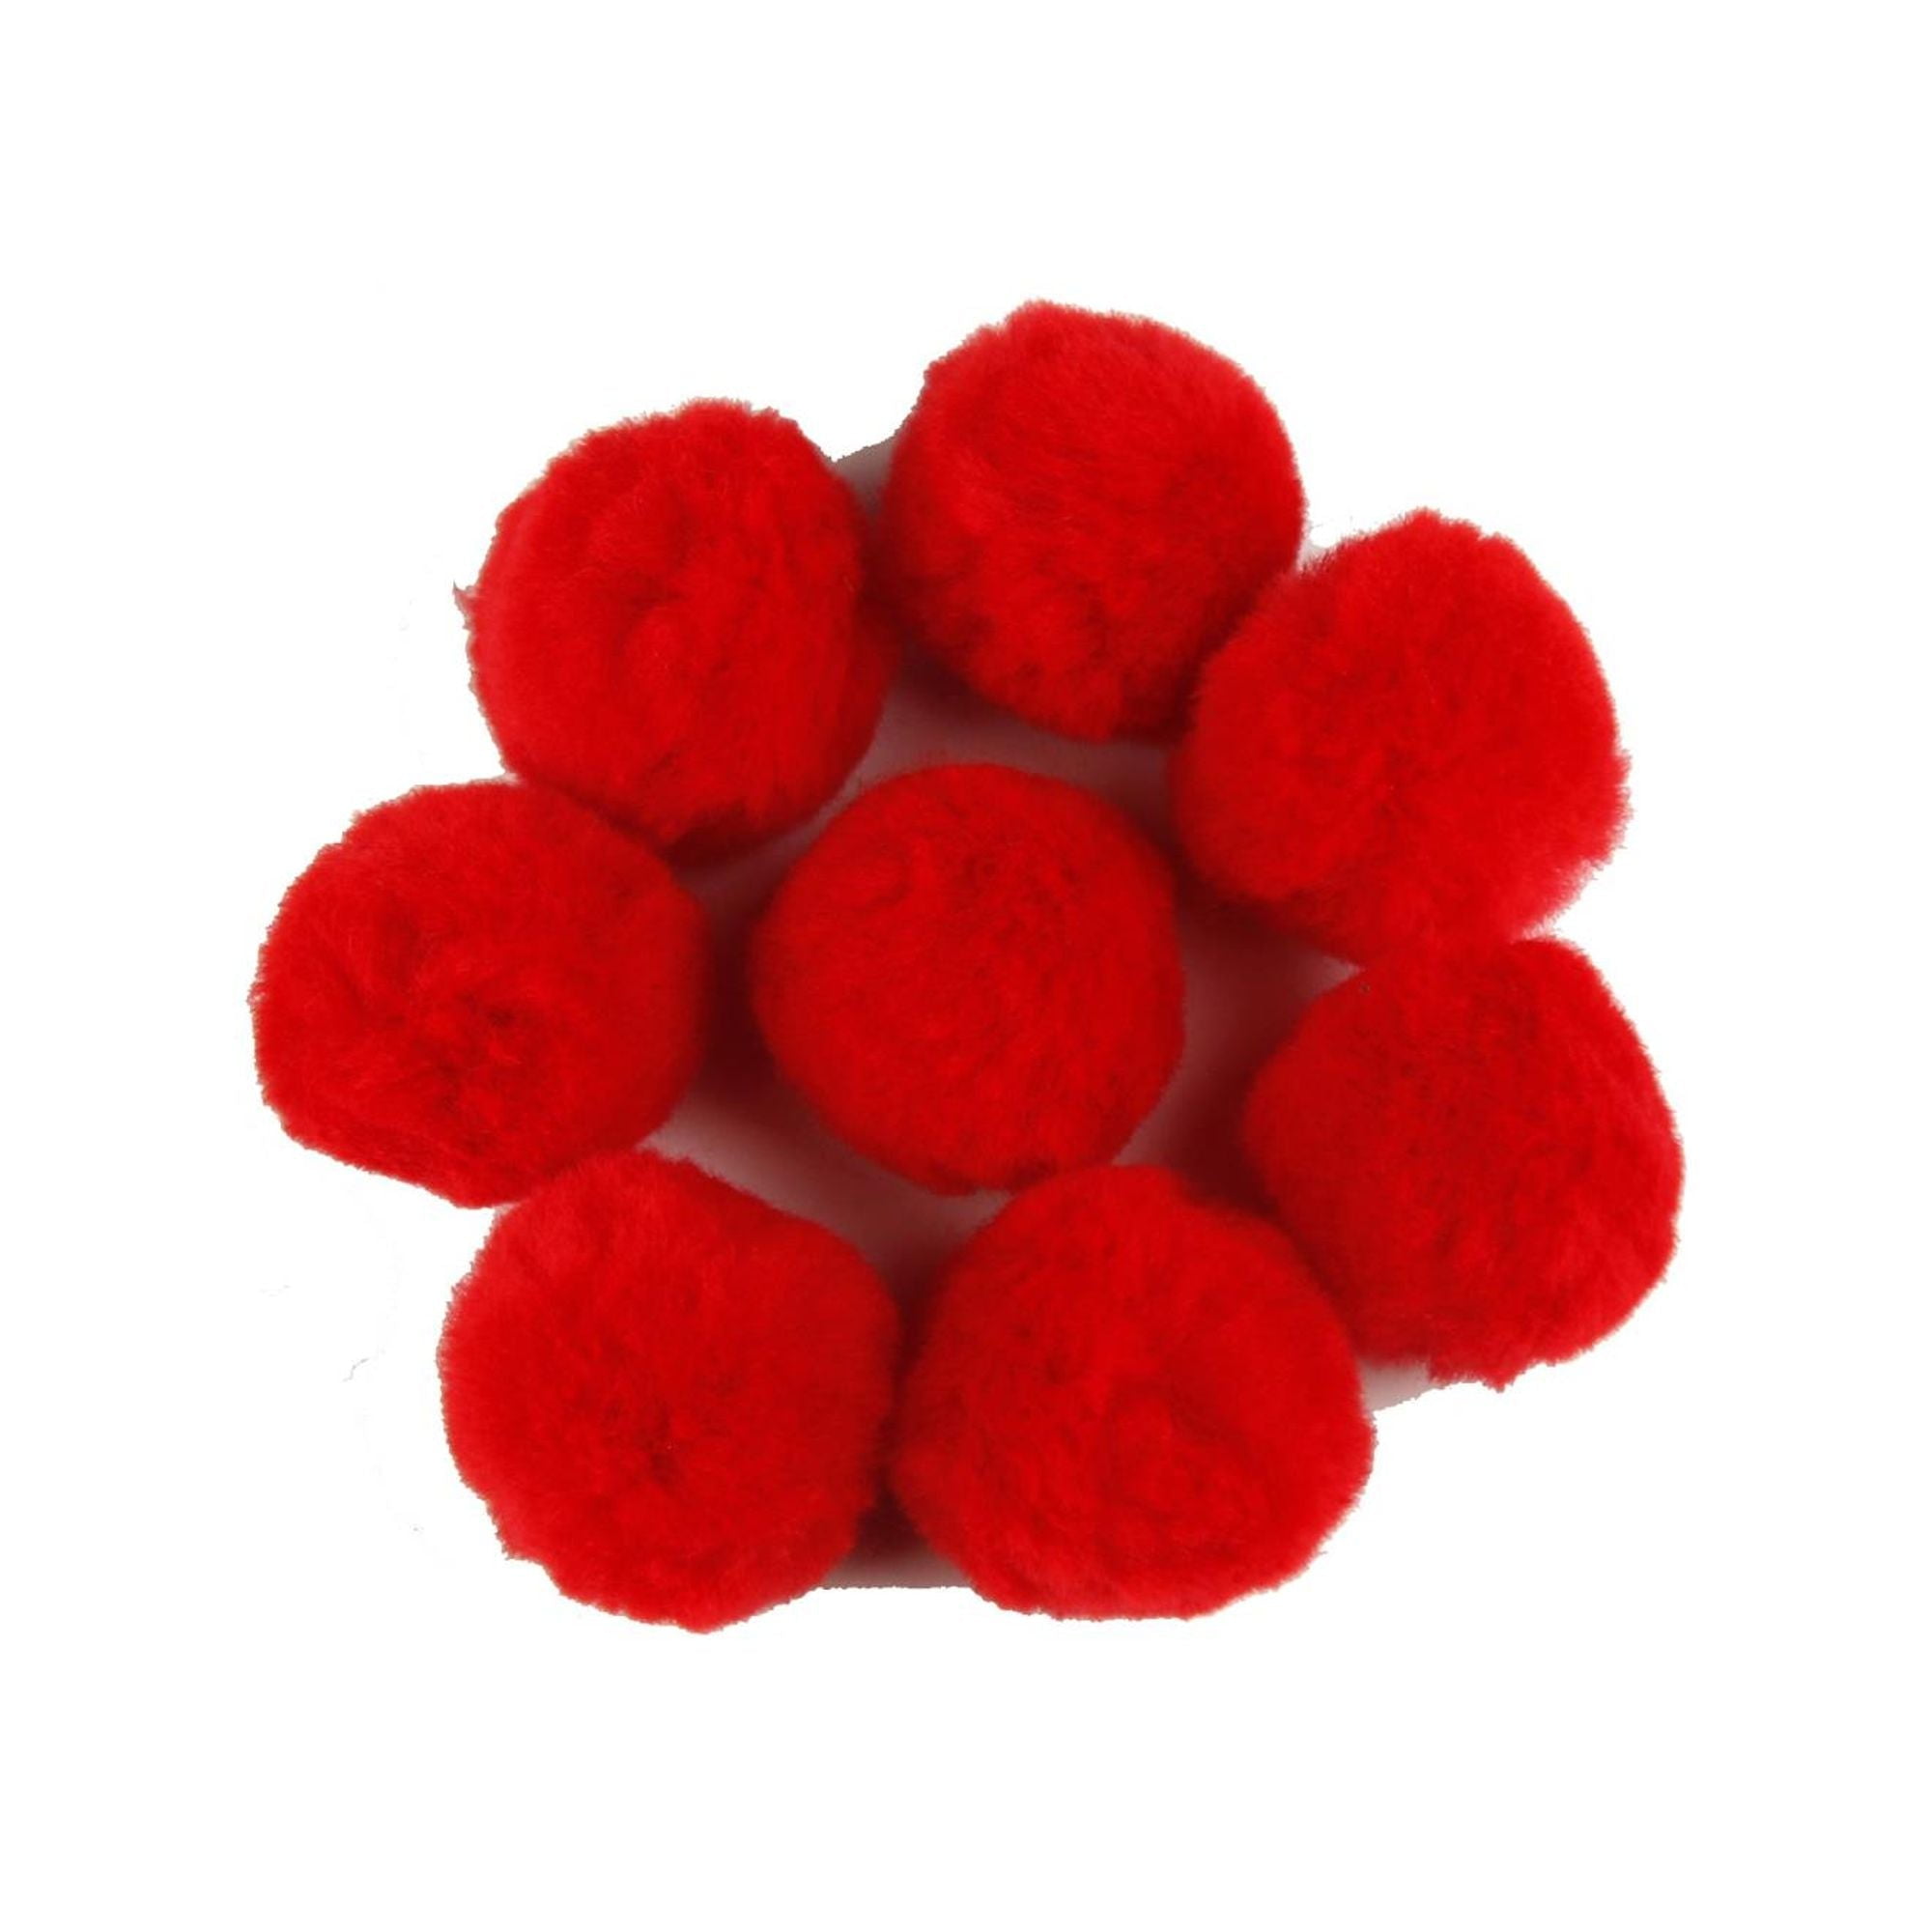 2 Pom Poms by Creatology 20ct. in Red | Michaels